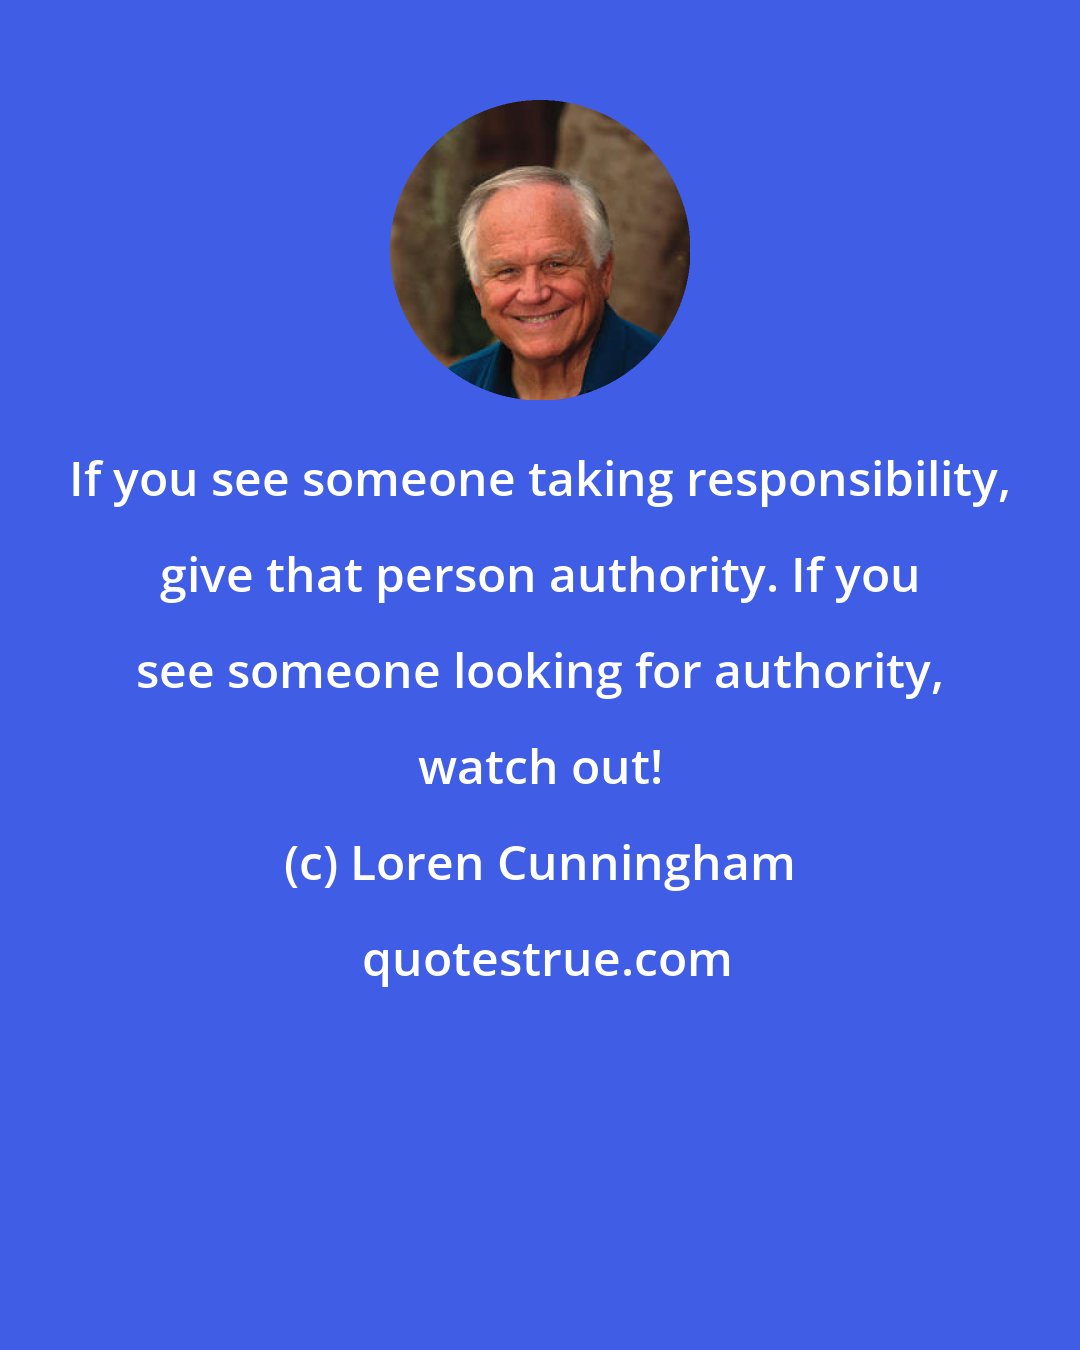 Loren Cunningham: If you see someone taking responsibility, give that person authority. If you see someone looking for authority, watch out!